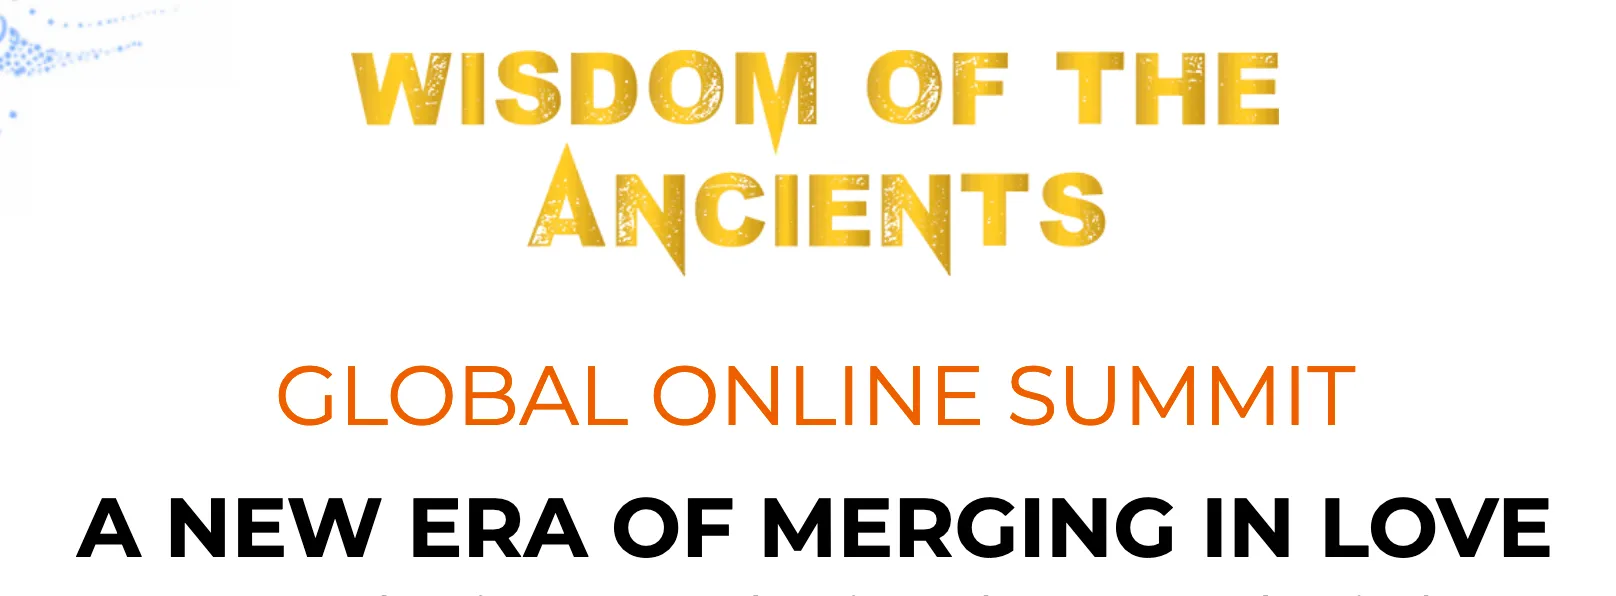 wisdom of the ancients summit